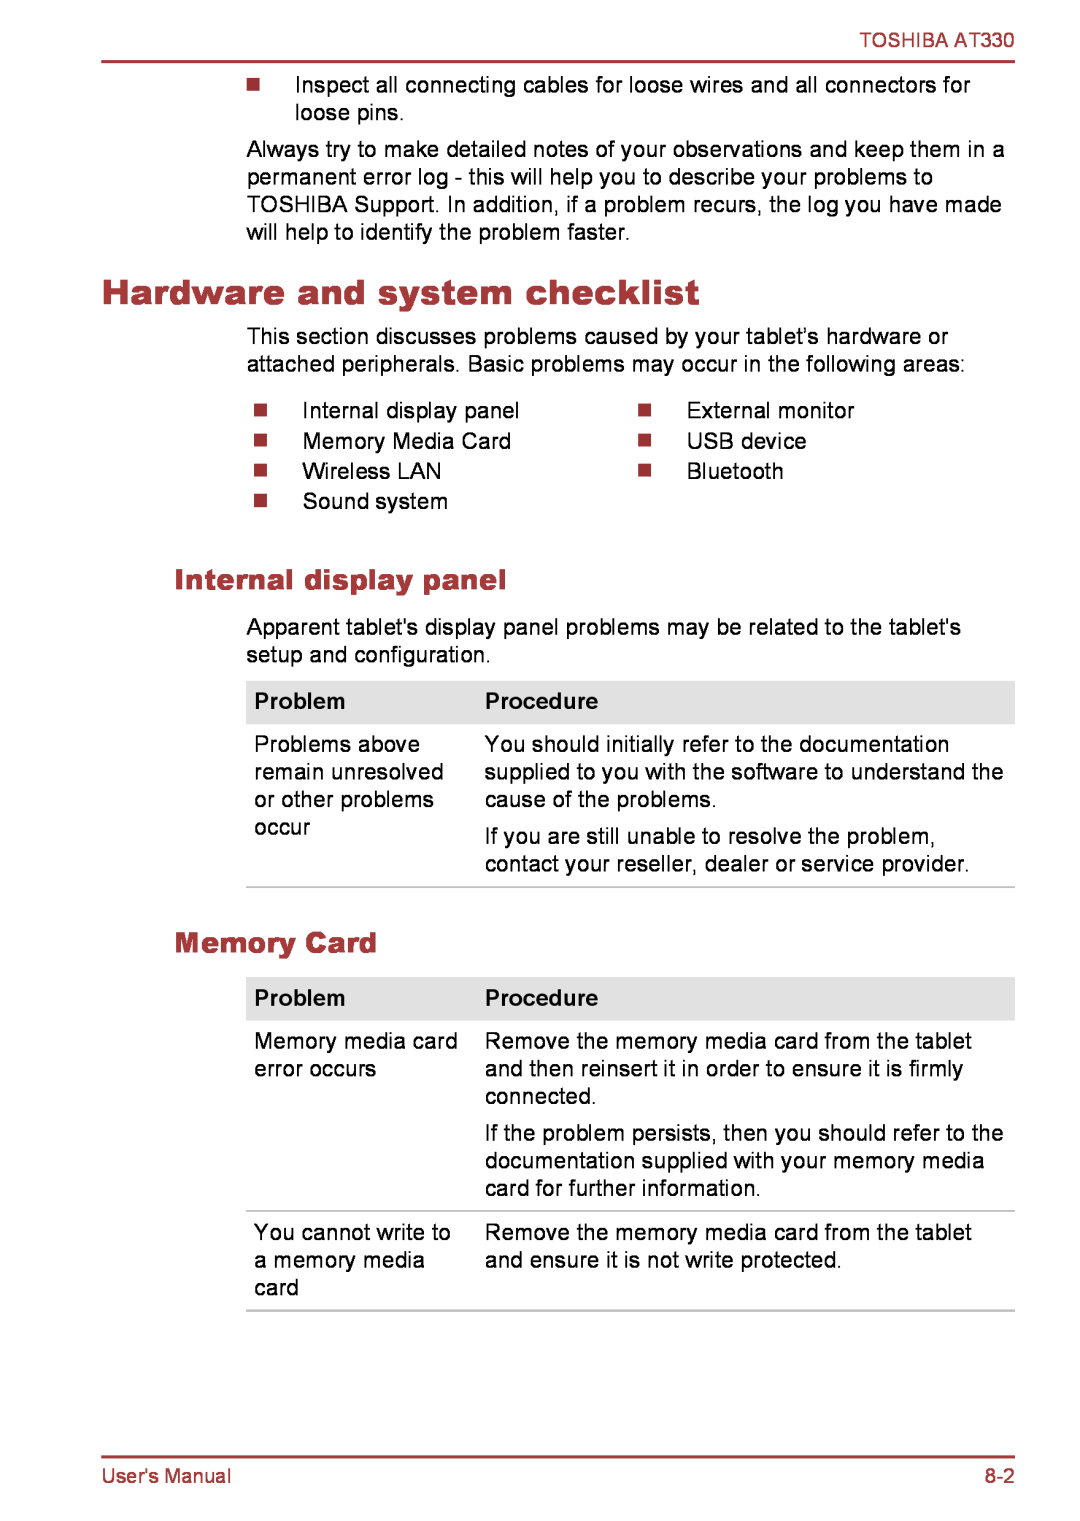 Toshiba at330 user manual Hardware and system checklist, Internal display panel, Memory Card, Problem, Procedure 